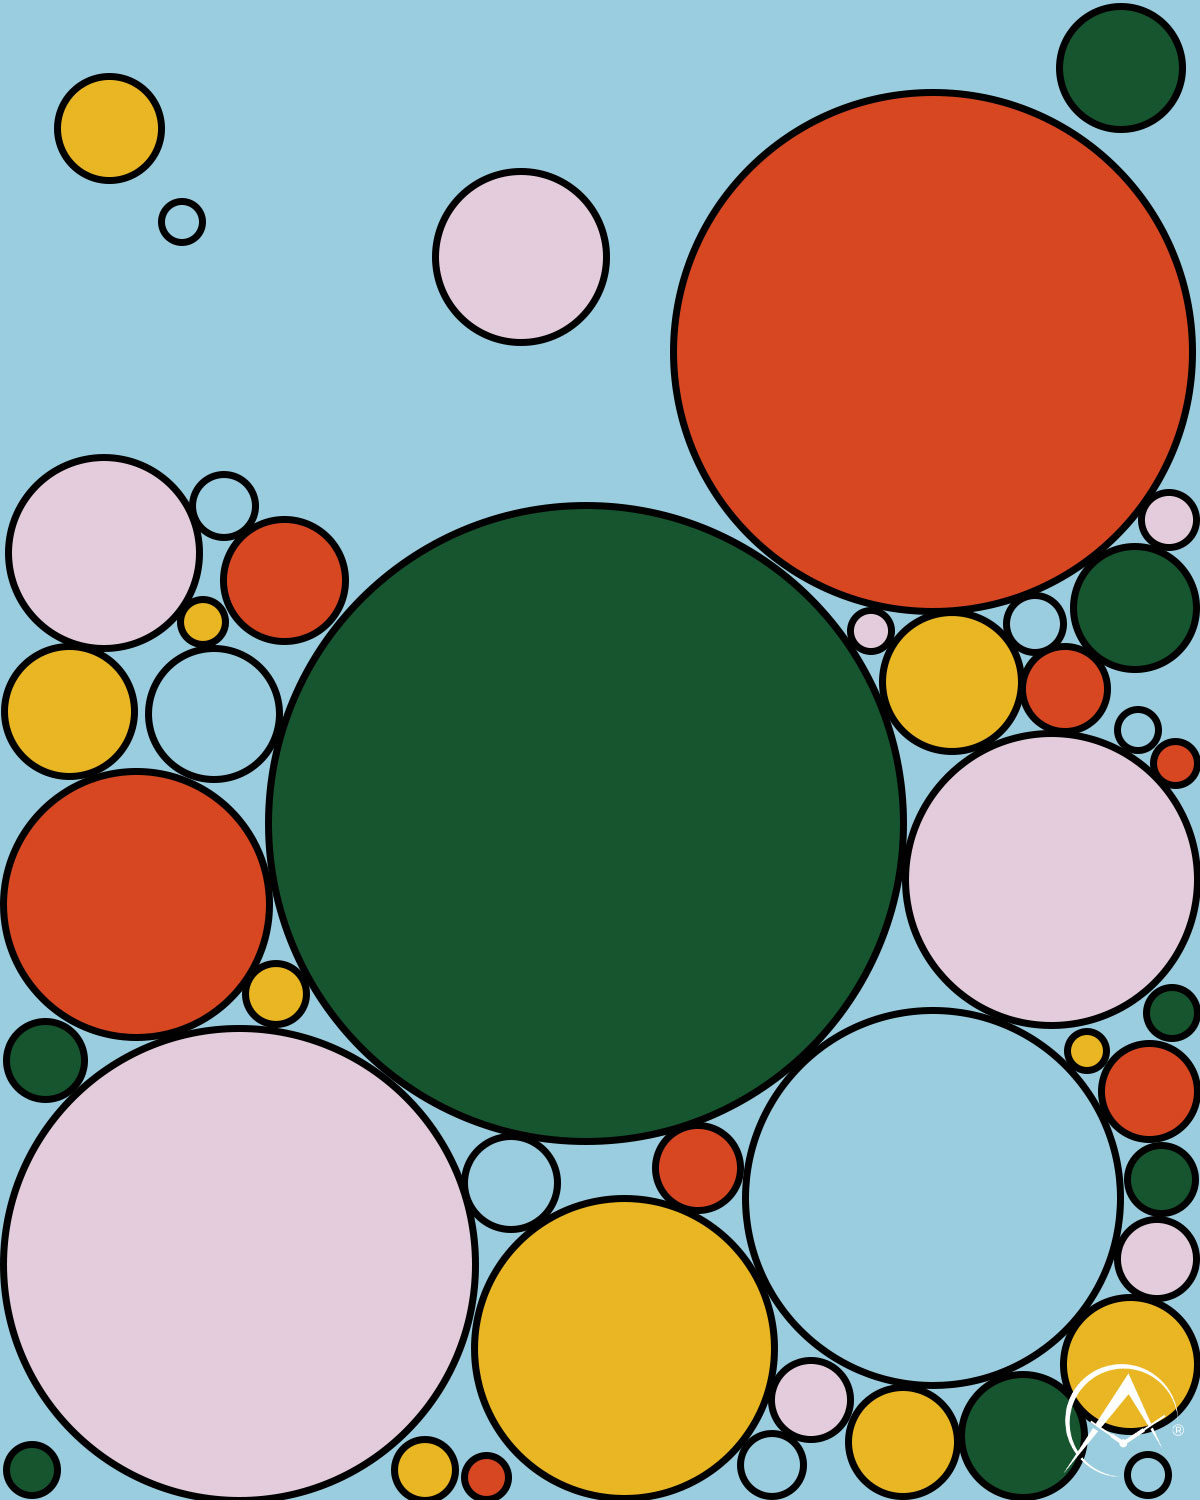 Green, Red, Pink, Yellow, and Blue Circles in Different Sizes on a Light Blue Background to Represent the Design of Rolex’s Celebration Timepiece.